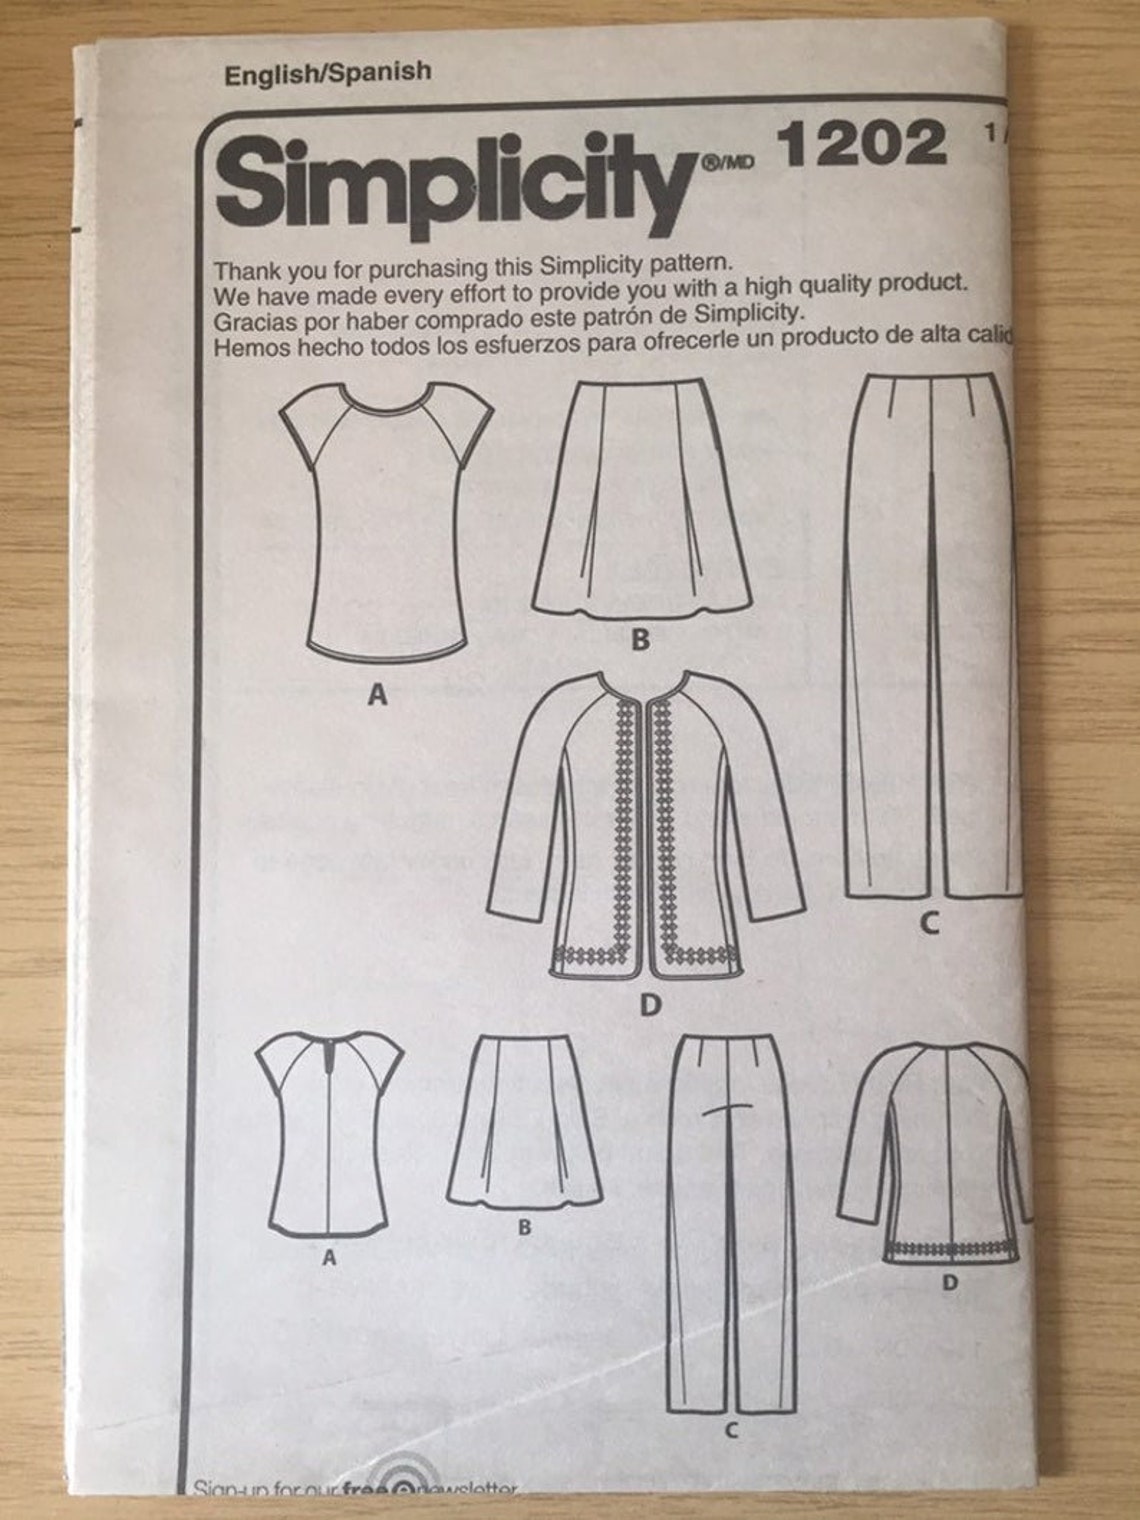 Simplicity sewing pattern K 1202 ©2015 Misses'/Women's | Etsy